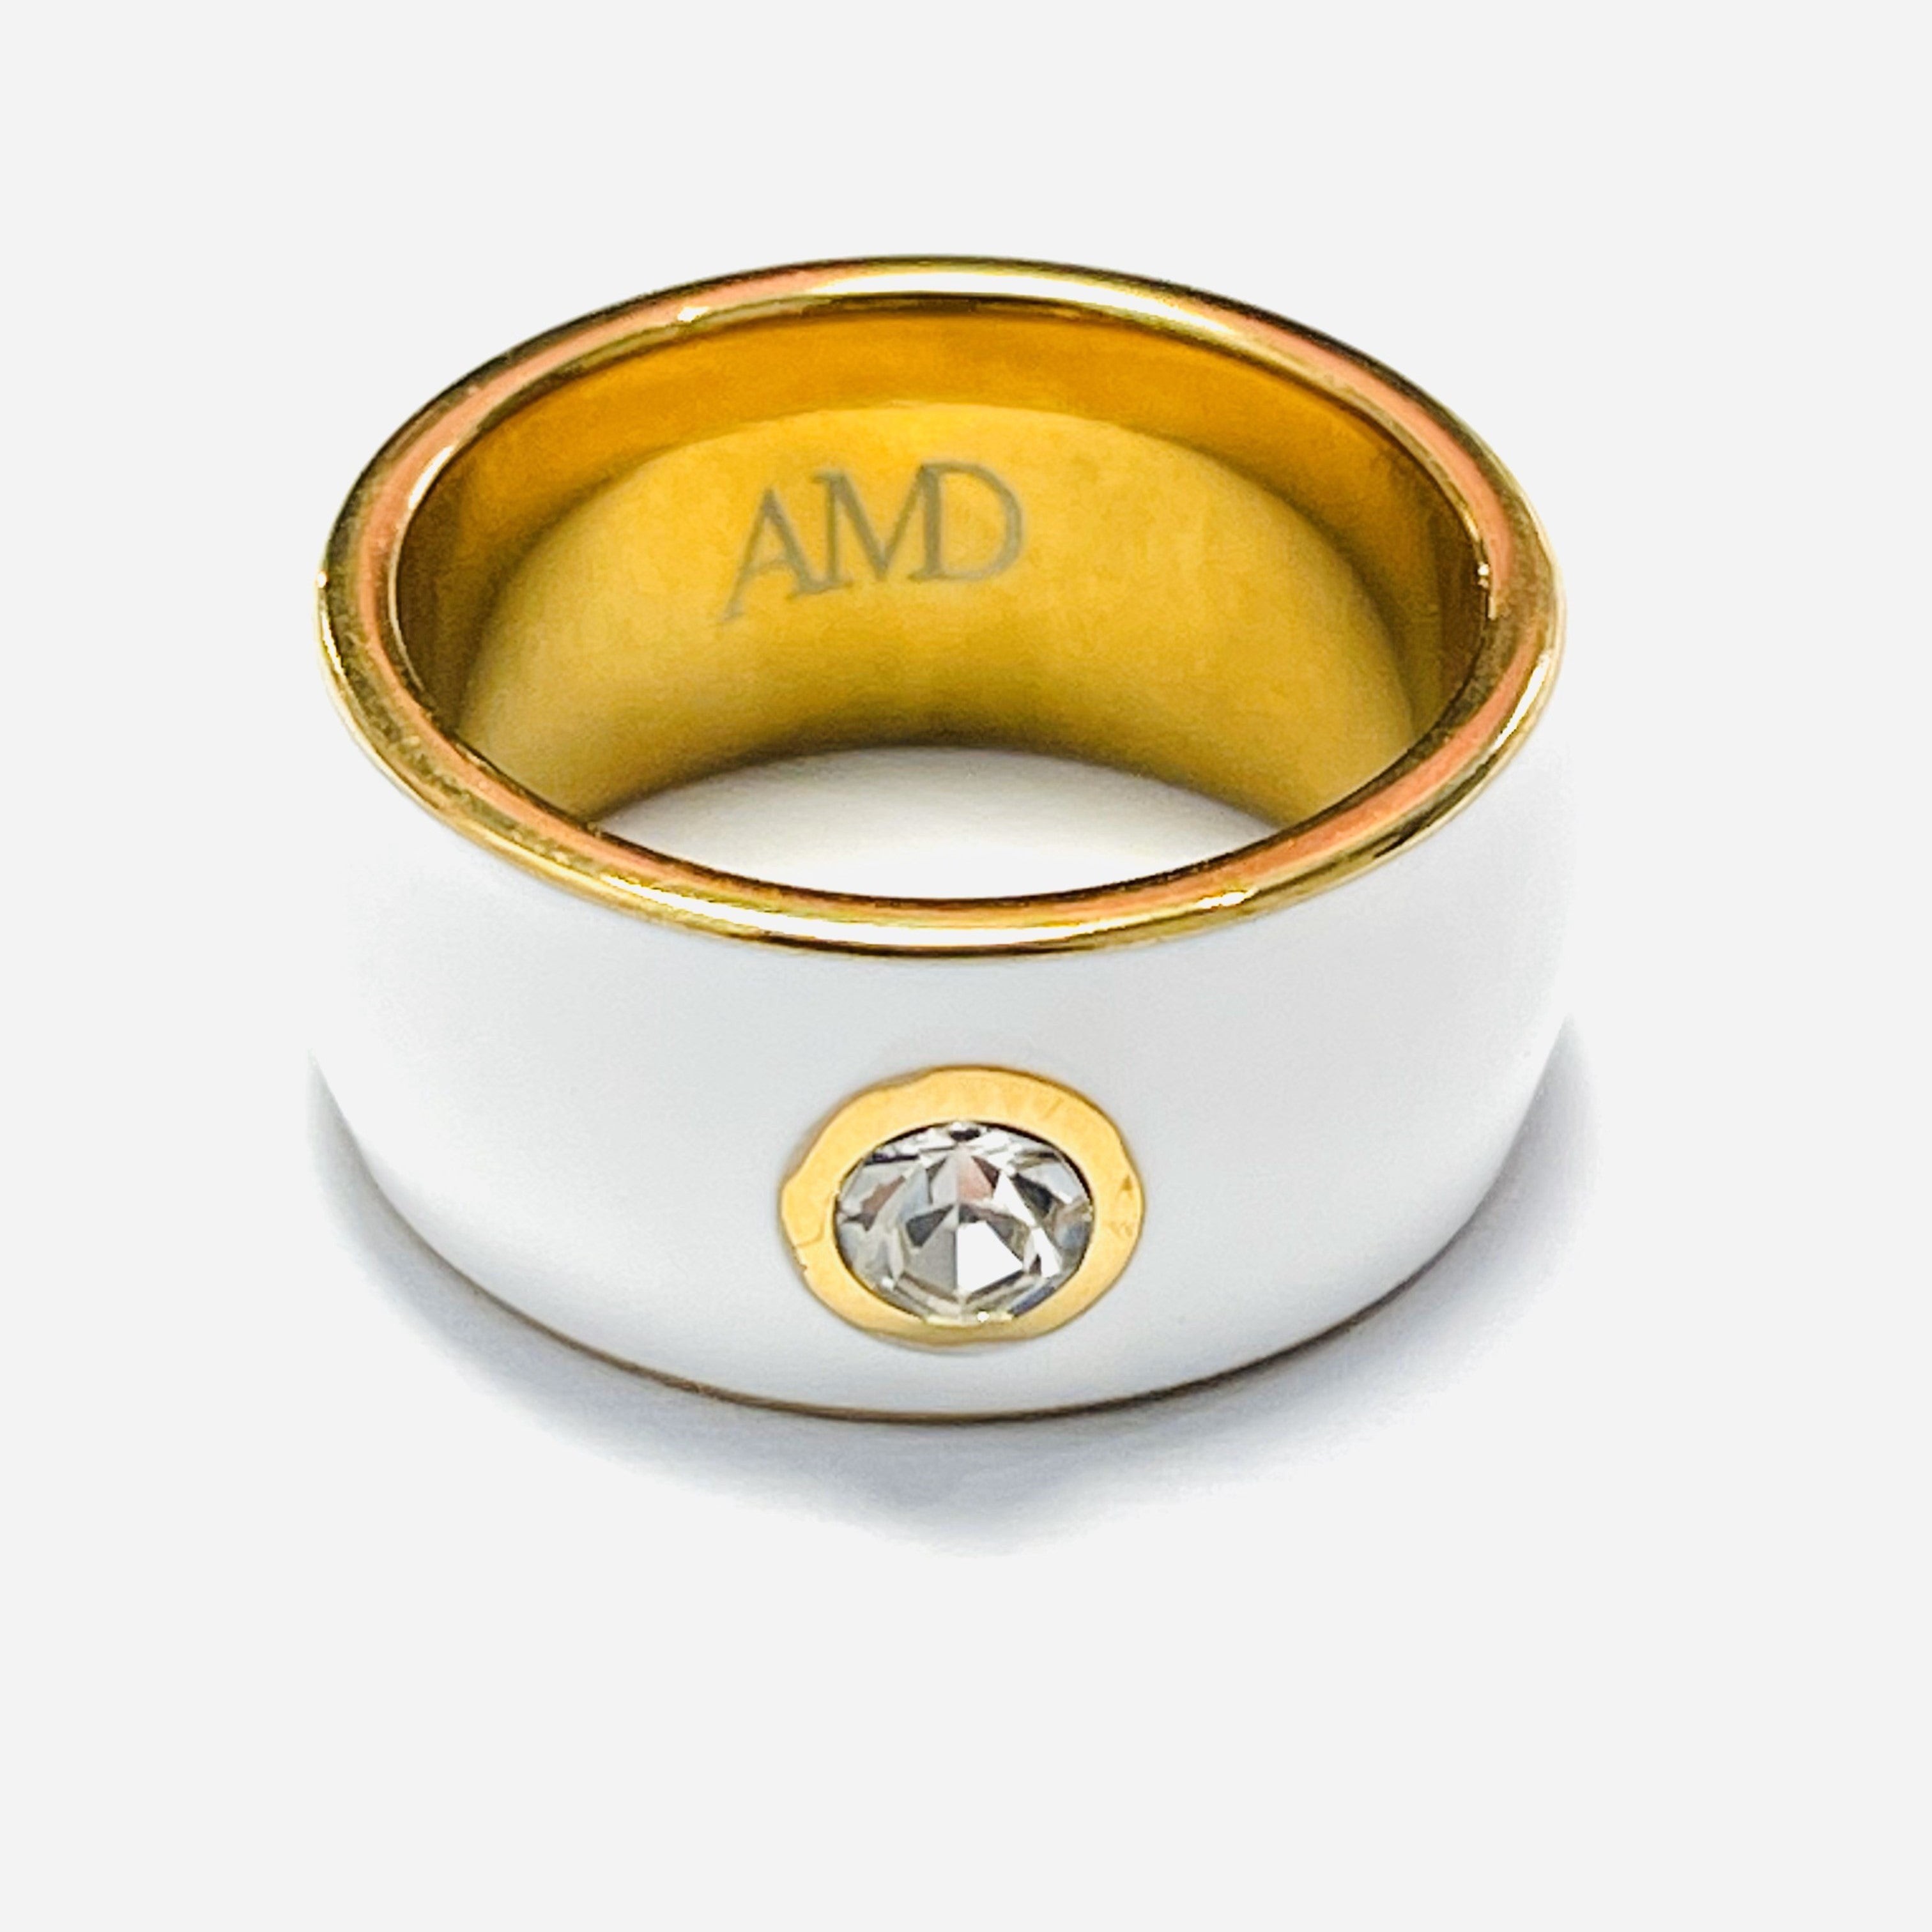 The Clara Ring - AMD COLLECTIVE